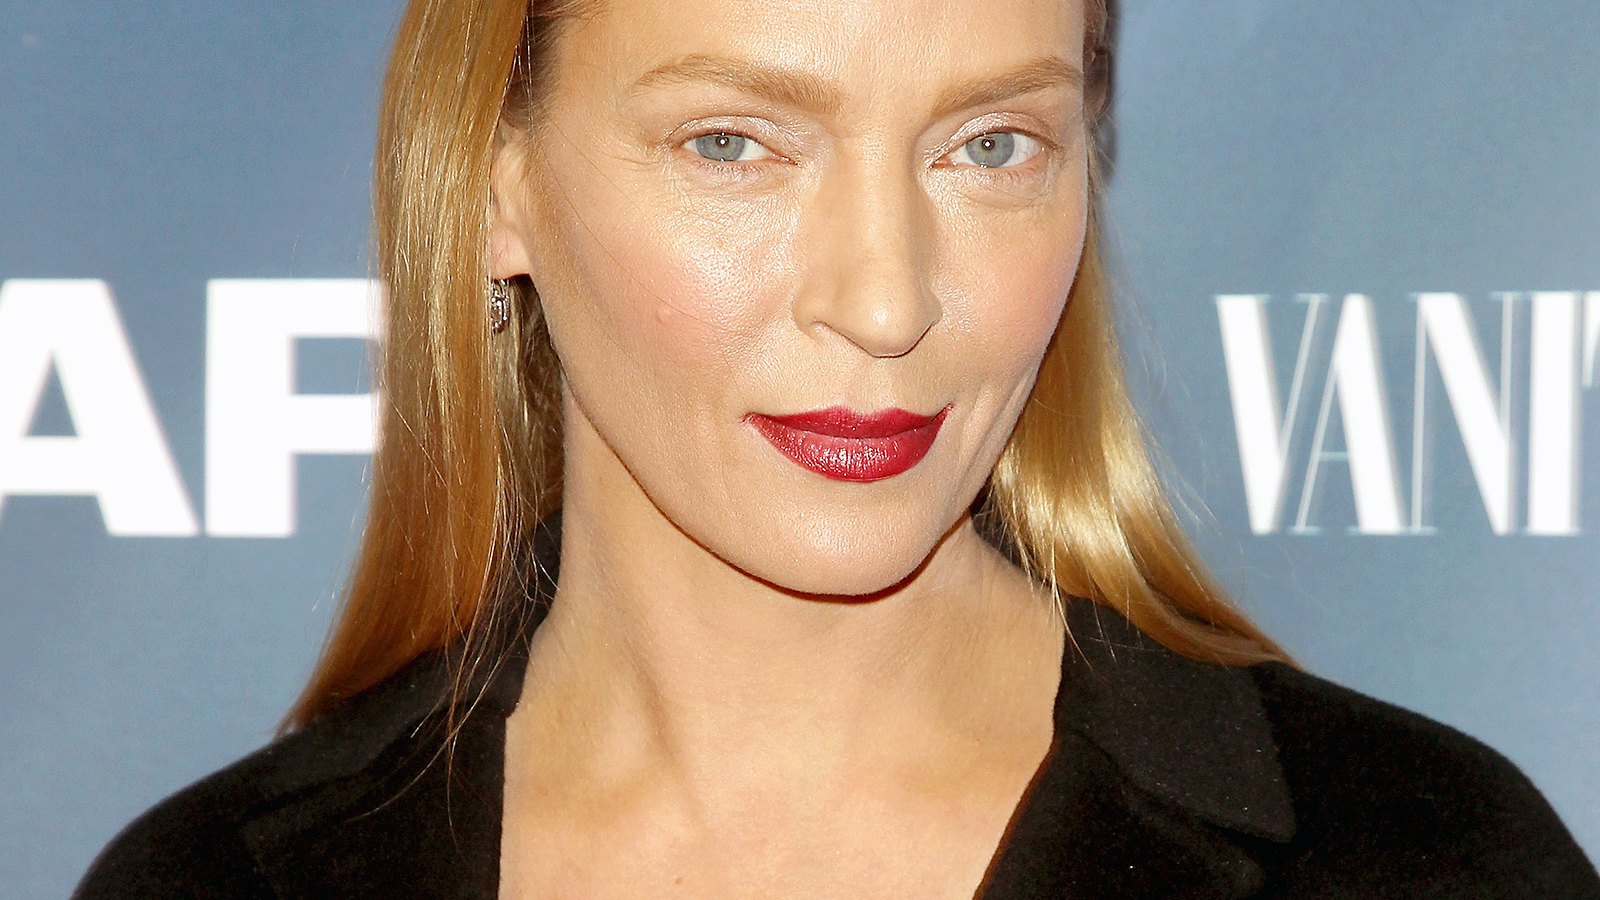 Uma Thurman at "The Slap" premiere party at The New Museum on Feb. 9